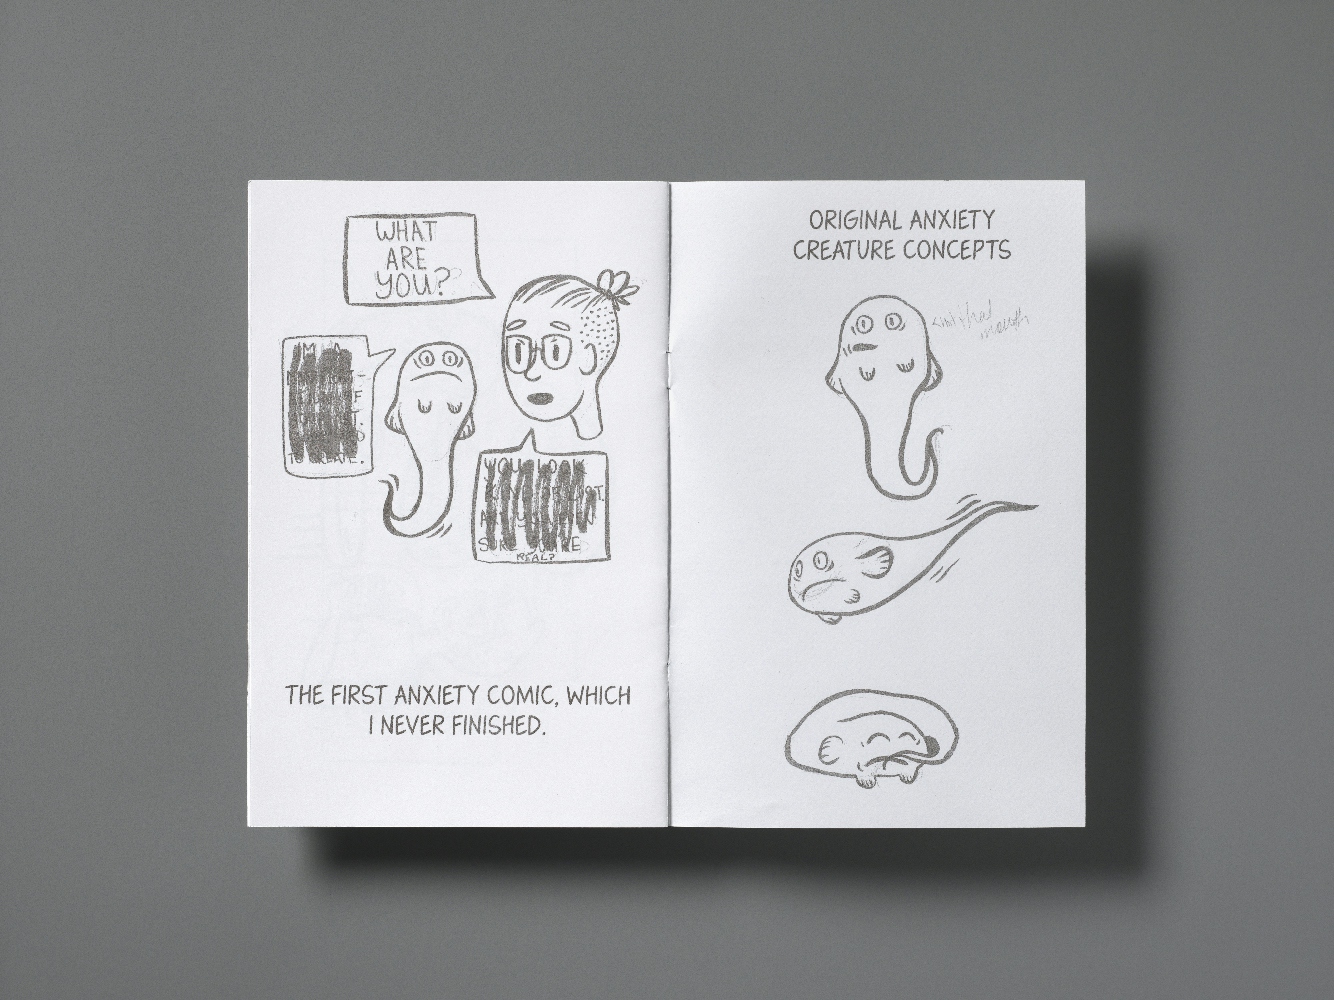 A double page spread from a comic-zine called Anxiety Comics Vol. 1. The left page shows a young woman's head with a speech bubble saying "What are you?" as she looks at an anxious looking fish-like creature. Two other speech bubbles on the page have been crossed out so the text is unreadable. Text below the image says "The first anxiety comic, which I never finished." The righthand page has text at the top saying "Original anxiety creature concepts". Below it are three illustrations of the 'fish' creature still, swimming and curled up asleep.